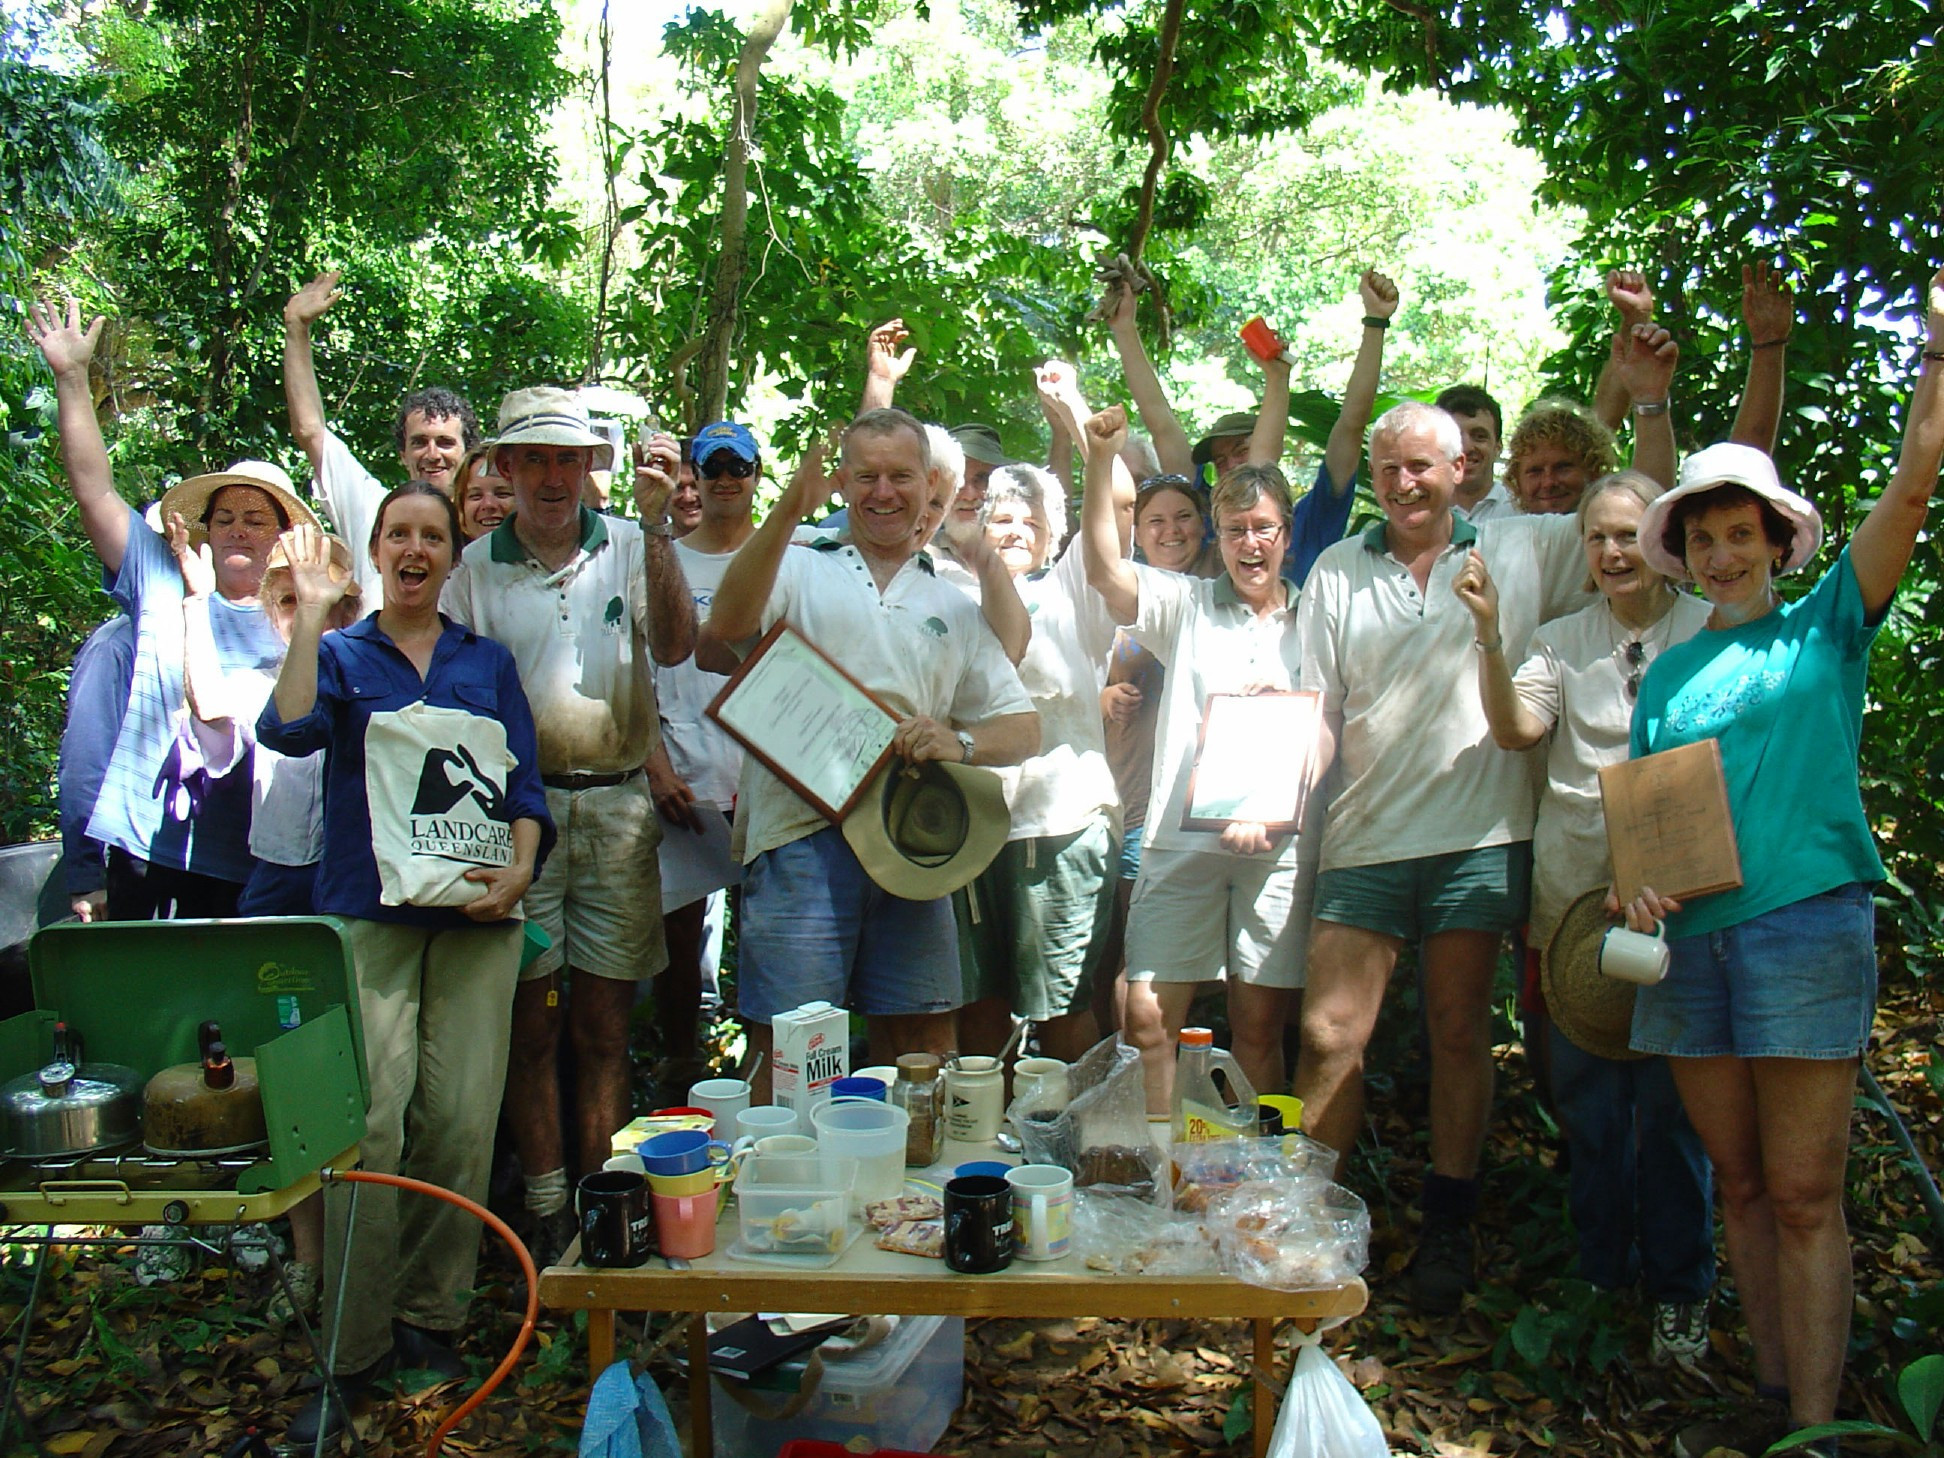 Treeforce volunteers in early 2000s including: Front row, from left, with Landcare bag, coordinator Lisa O’Mara; Paul Reilly; former vice-president Lee Crawford; former vice-president Suzanne Tree; Lesley Clark; former president Rob Campbell; former treasurer Ann Mohun; late Betty Nielsen.